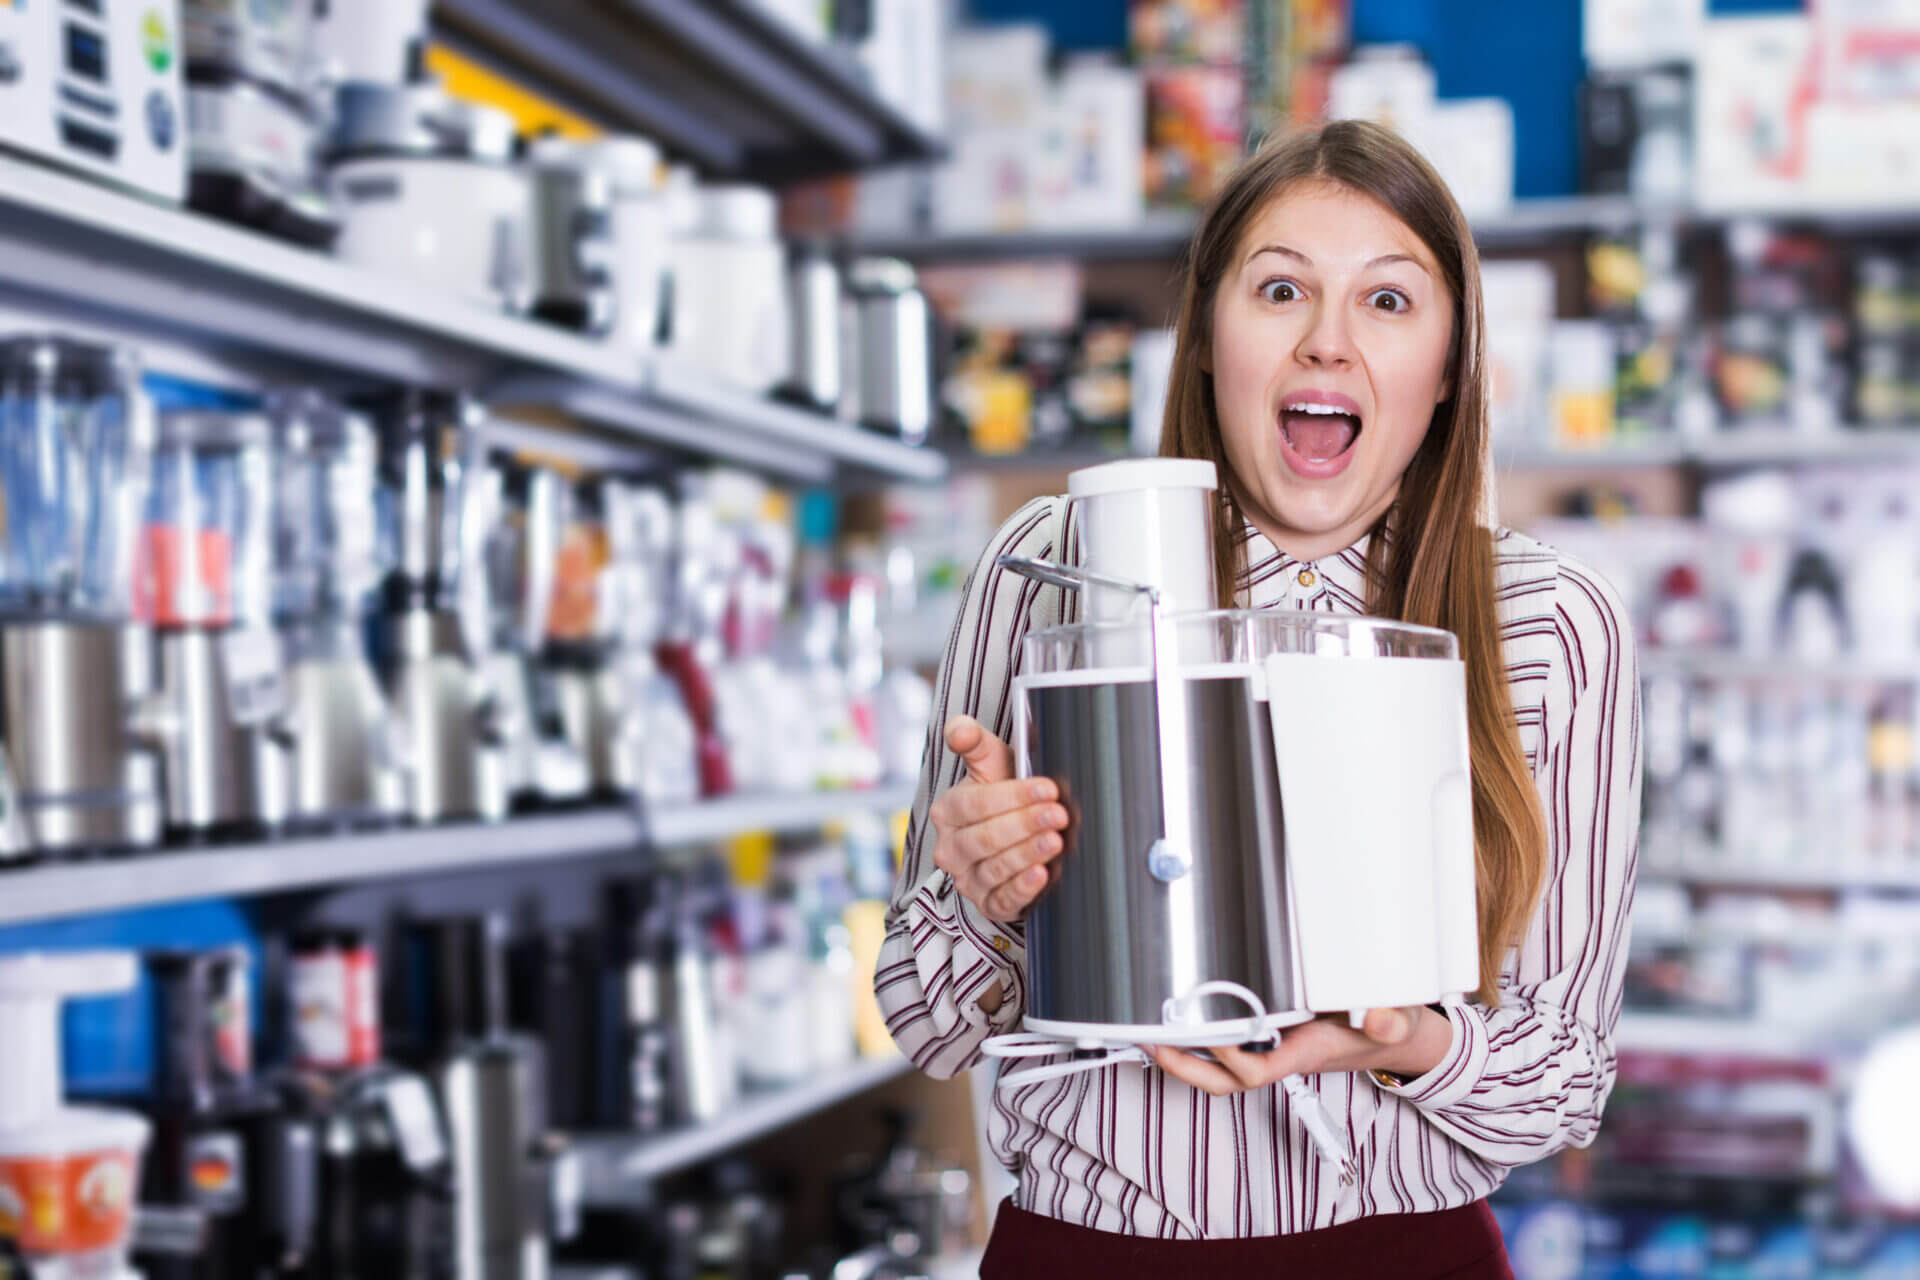 Electrical appliance recyclin is getting easier: Woman in electrical store holding food mixer